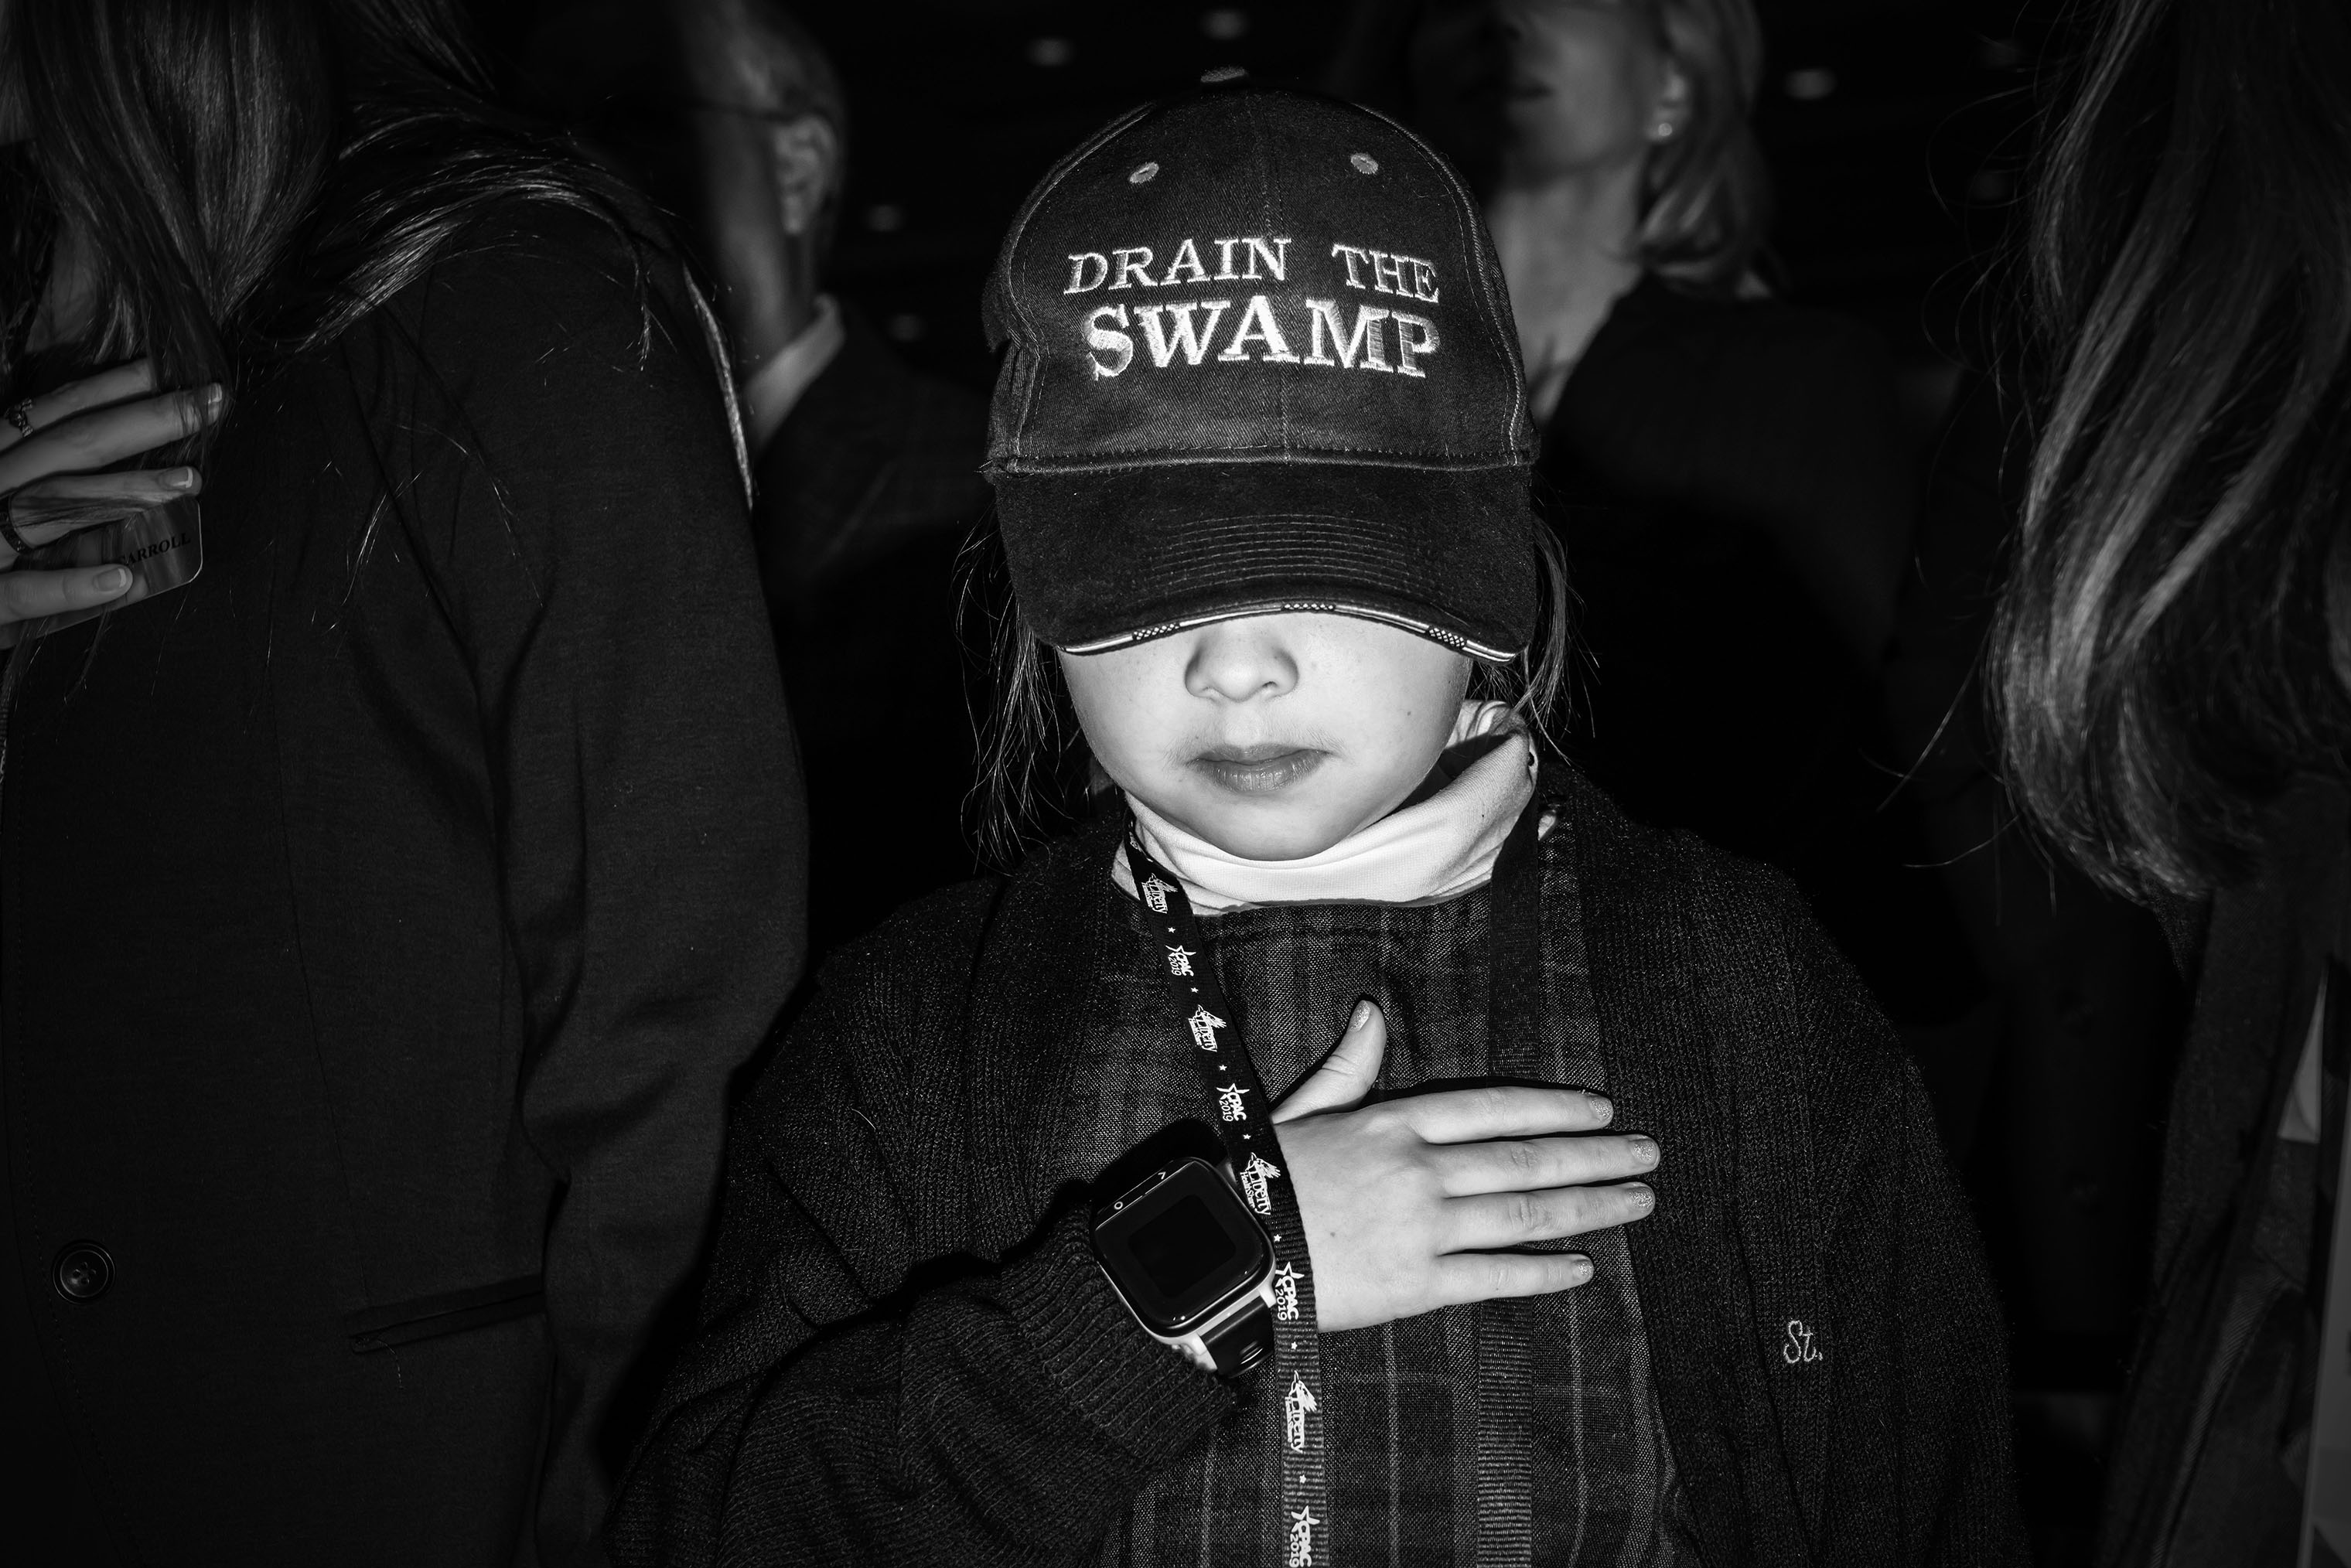 A young attendee shows support for President Donald Trump. (Mark Peterson—Redux for TIME)